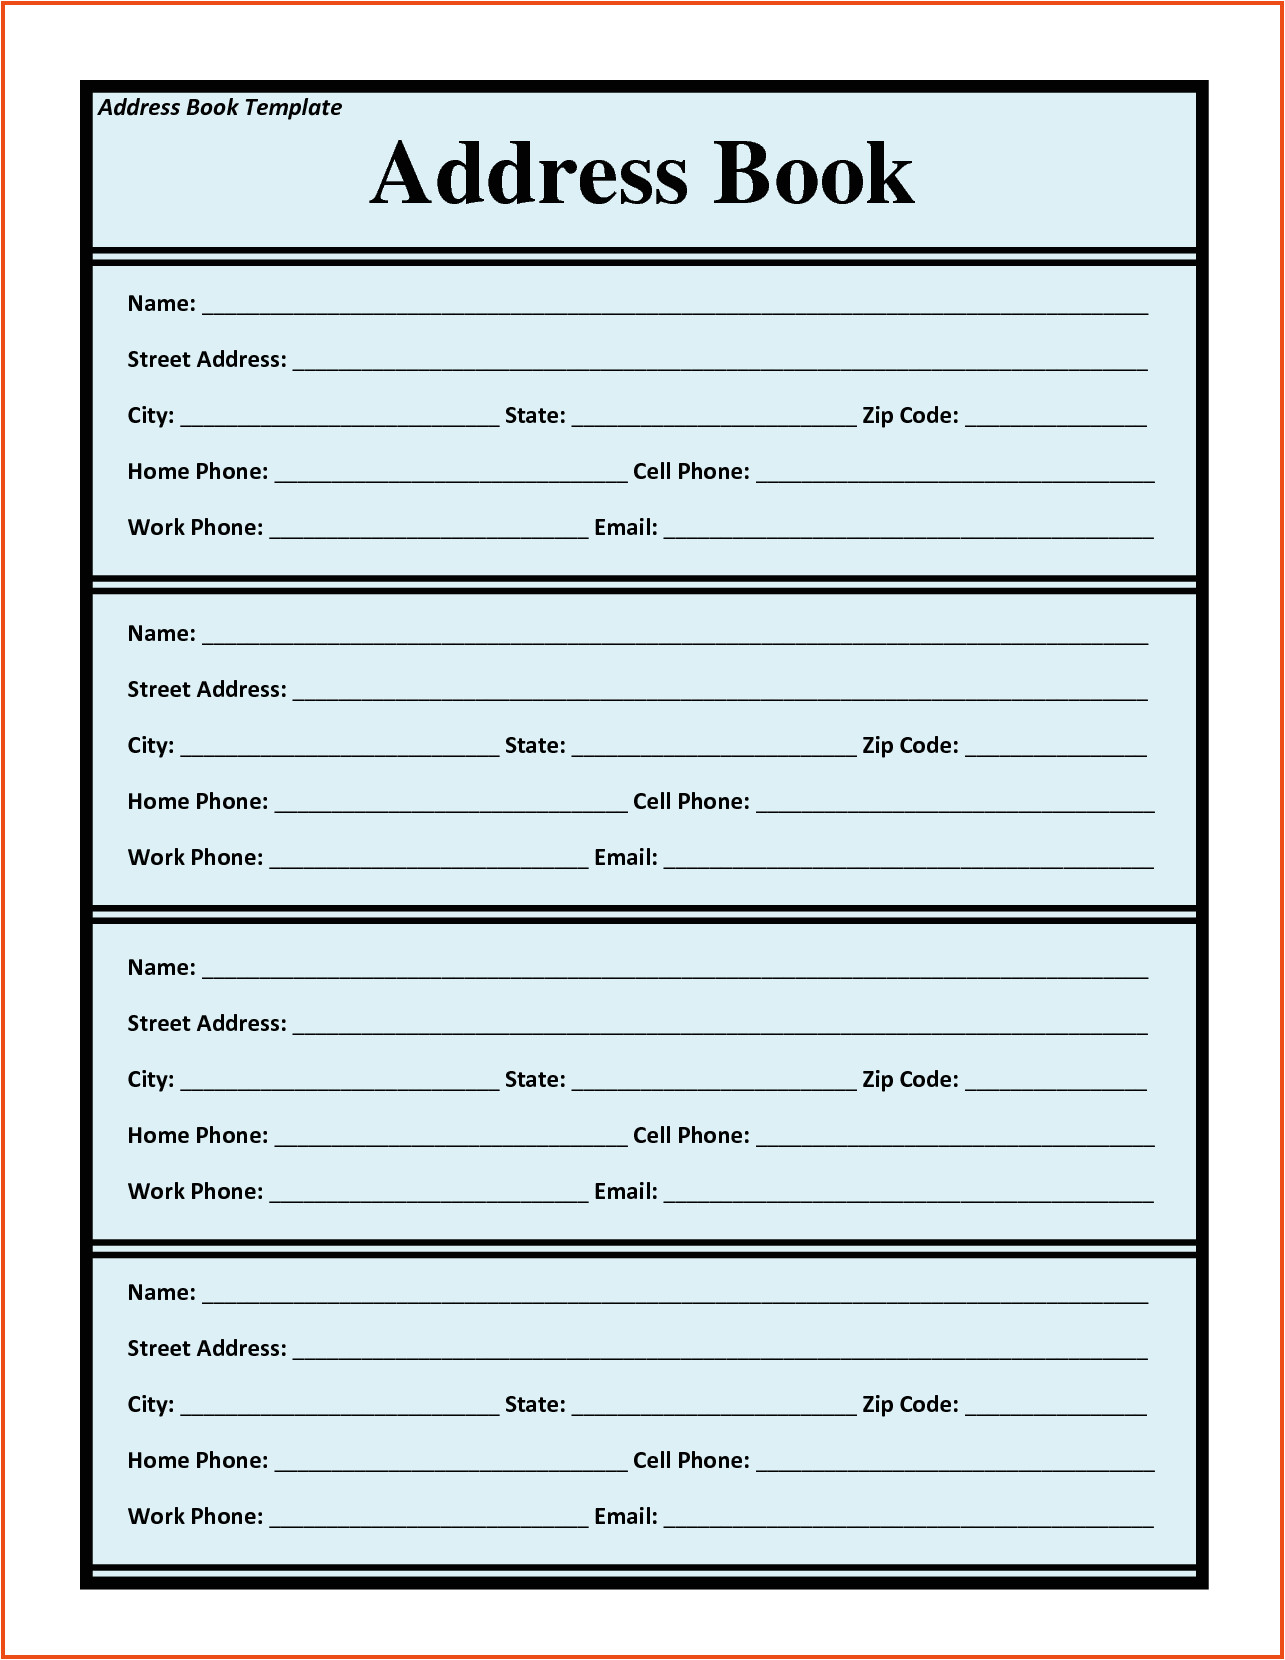 address book template software book template mac tutorials for openoffice printing labels in libreoffice youtube printable address coloring